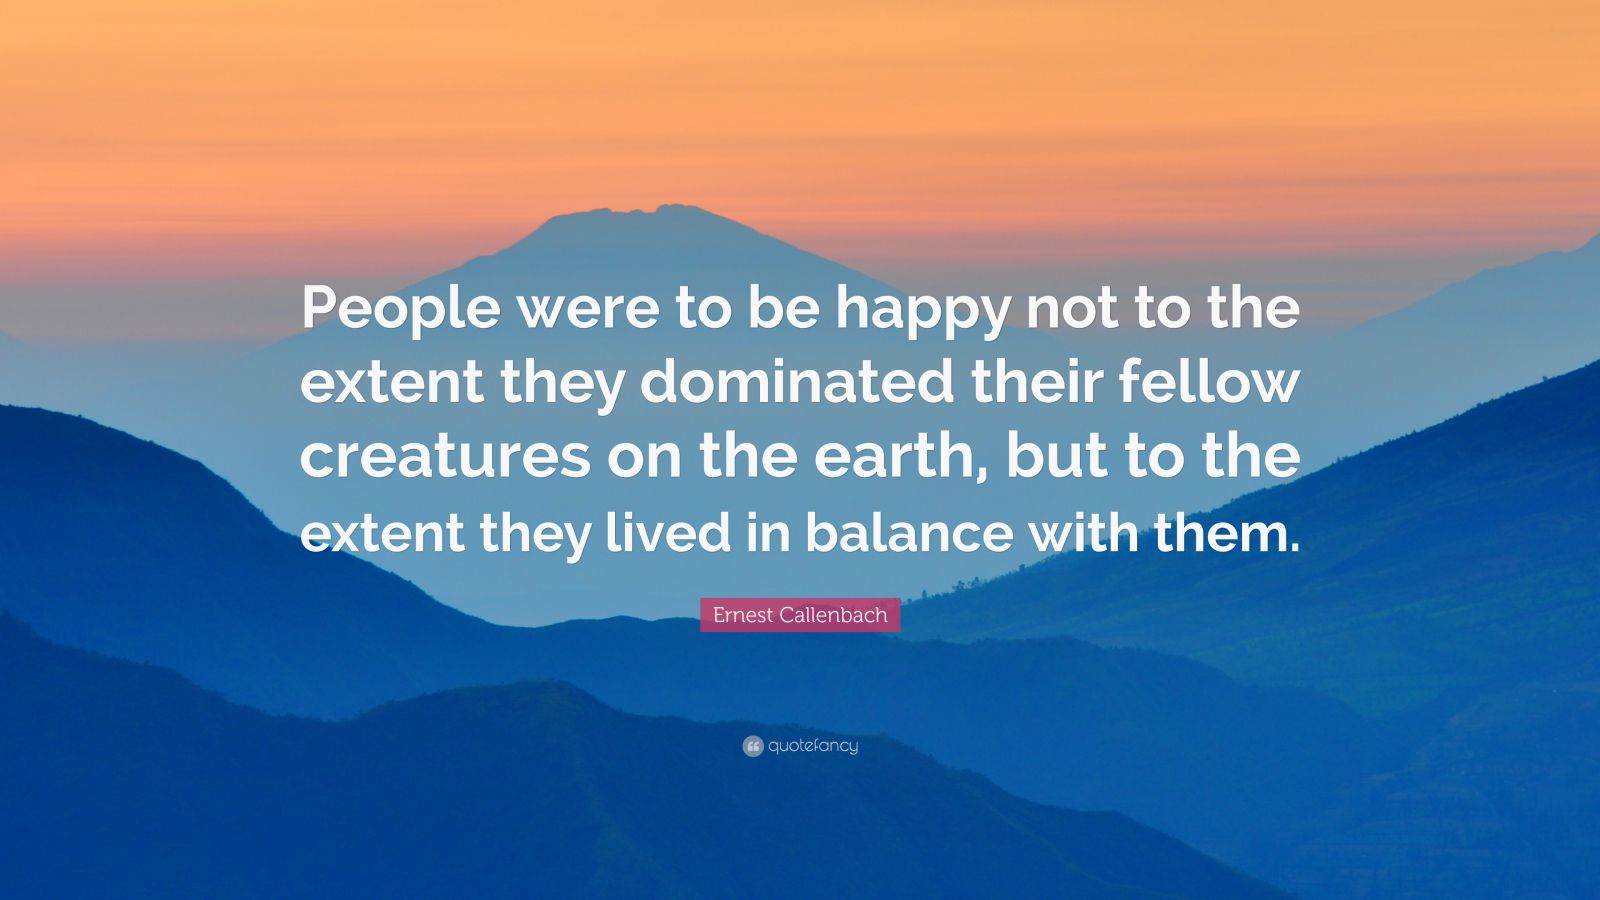 Ernest Callenbach Quote: “People were to be happy not to the extent ...